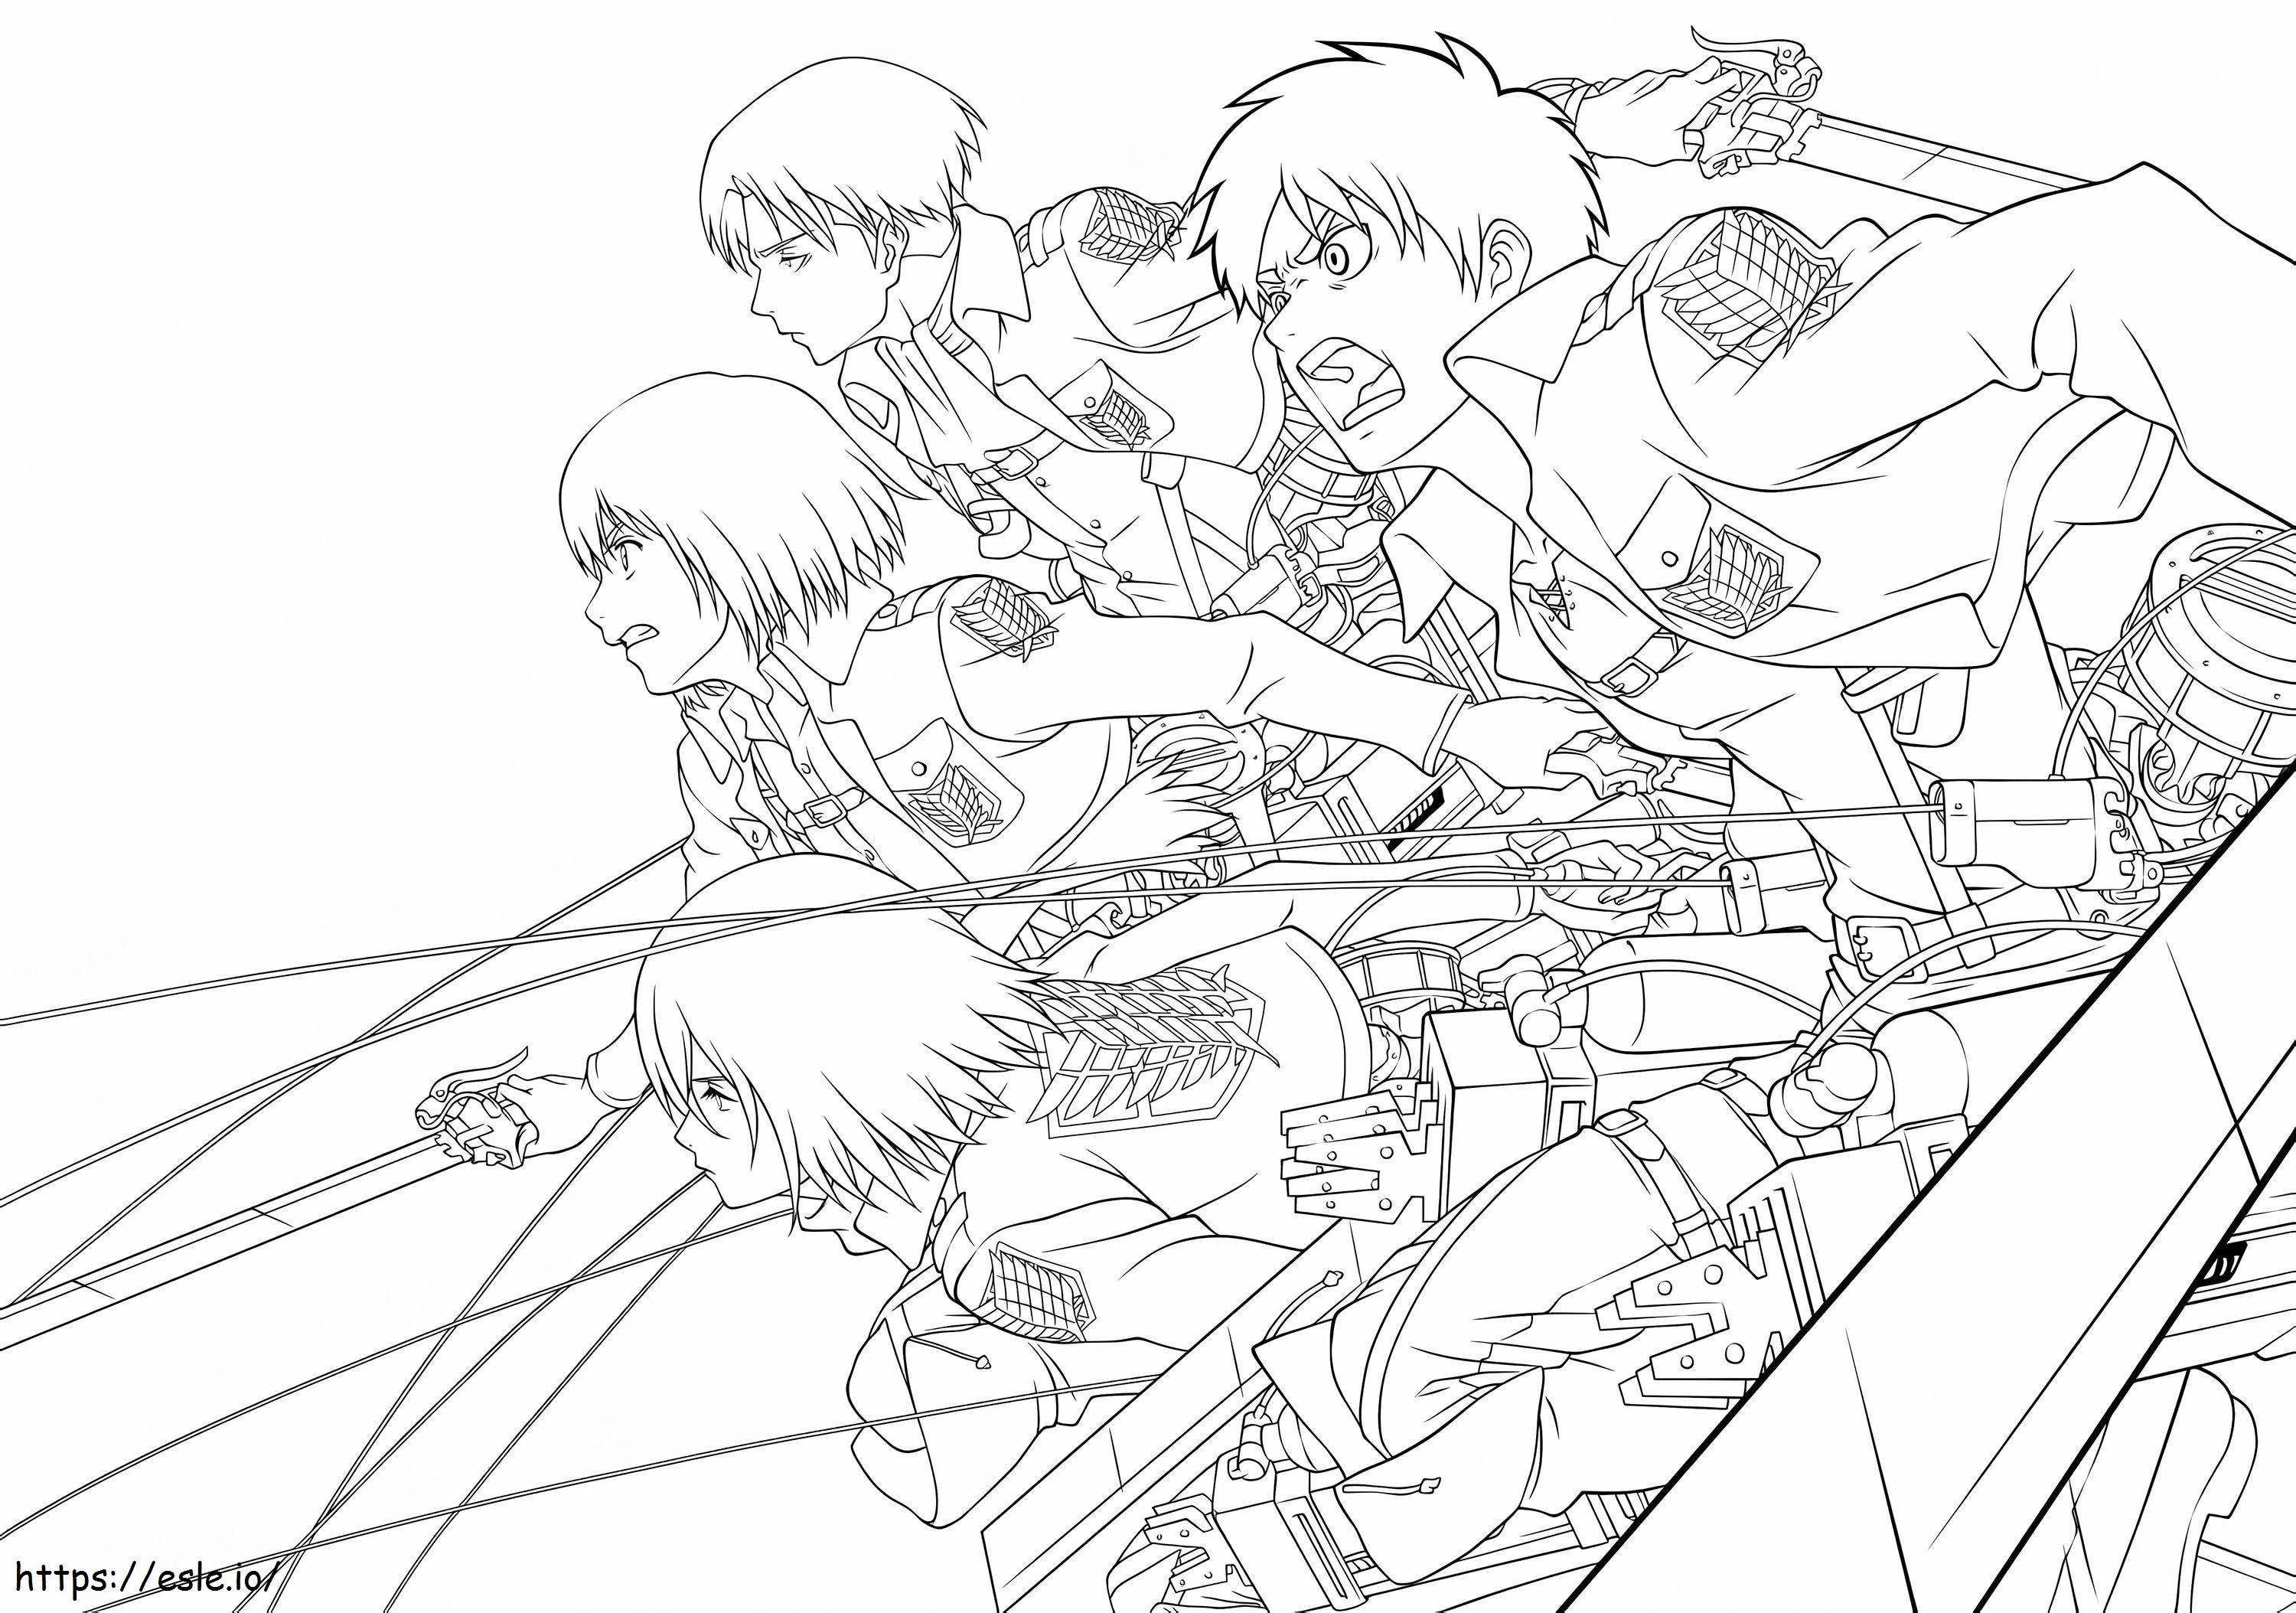 Levi And The Titan Battle Team coloring page